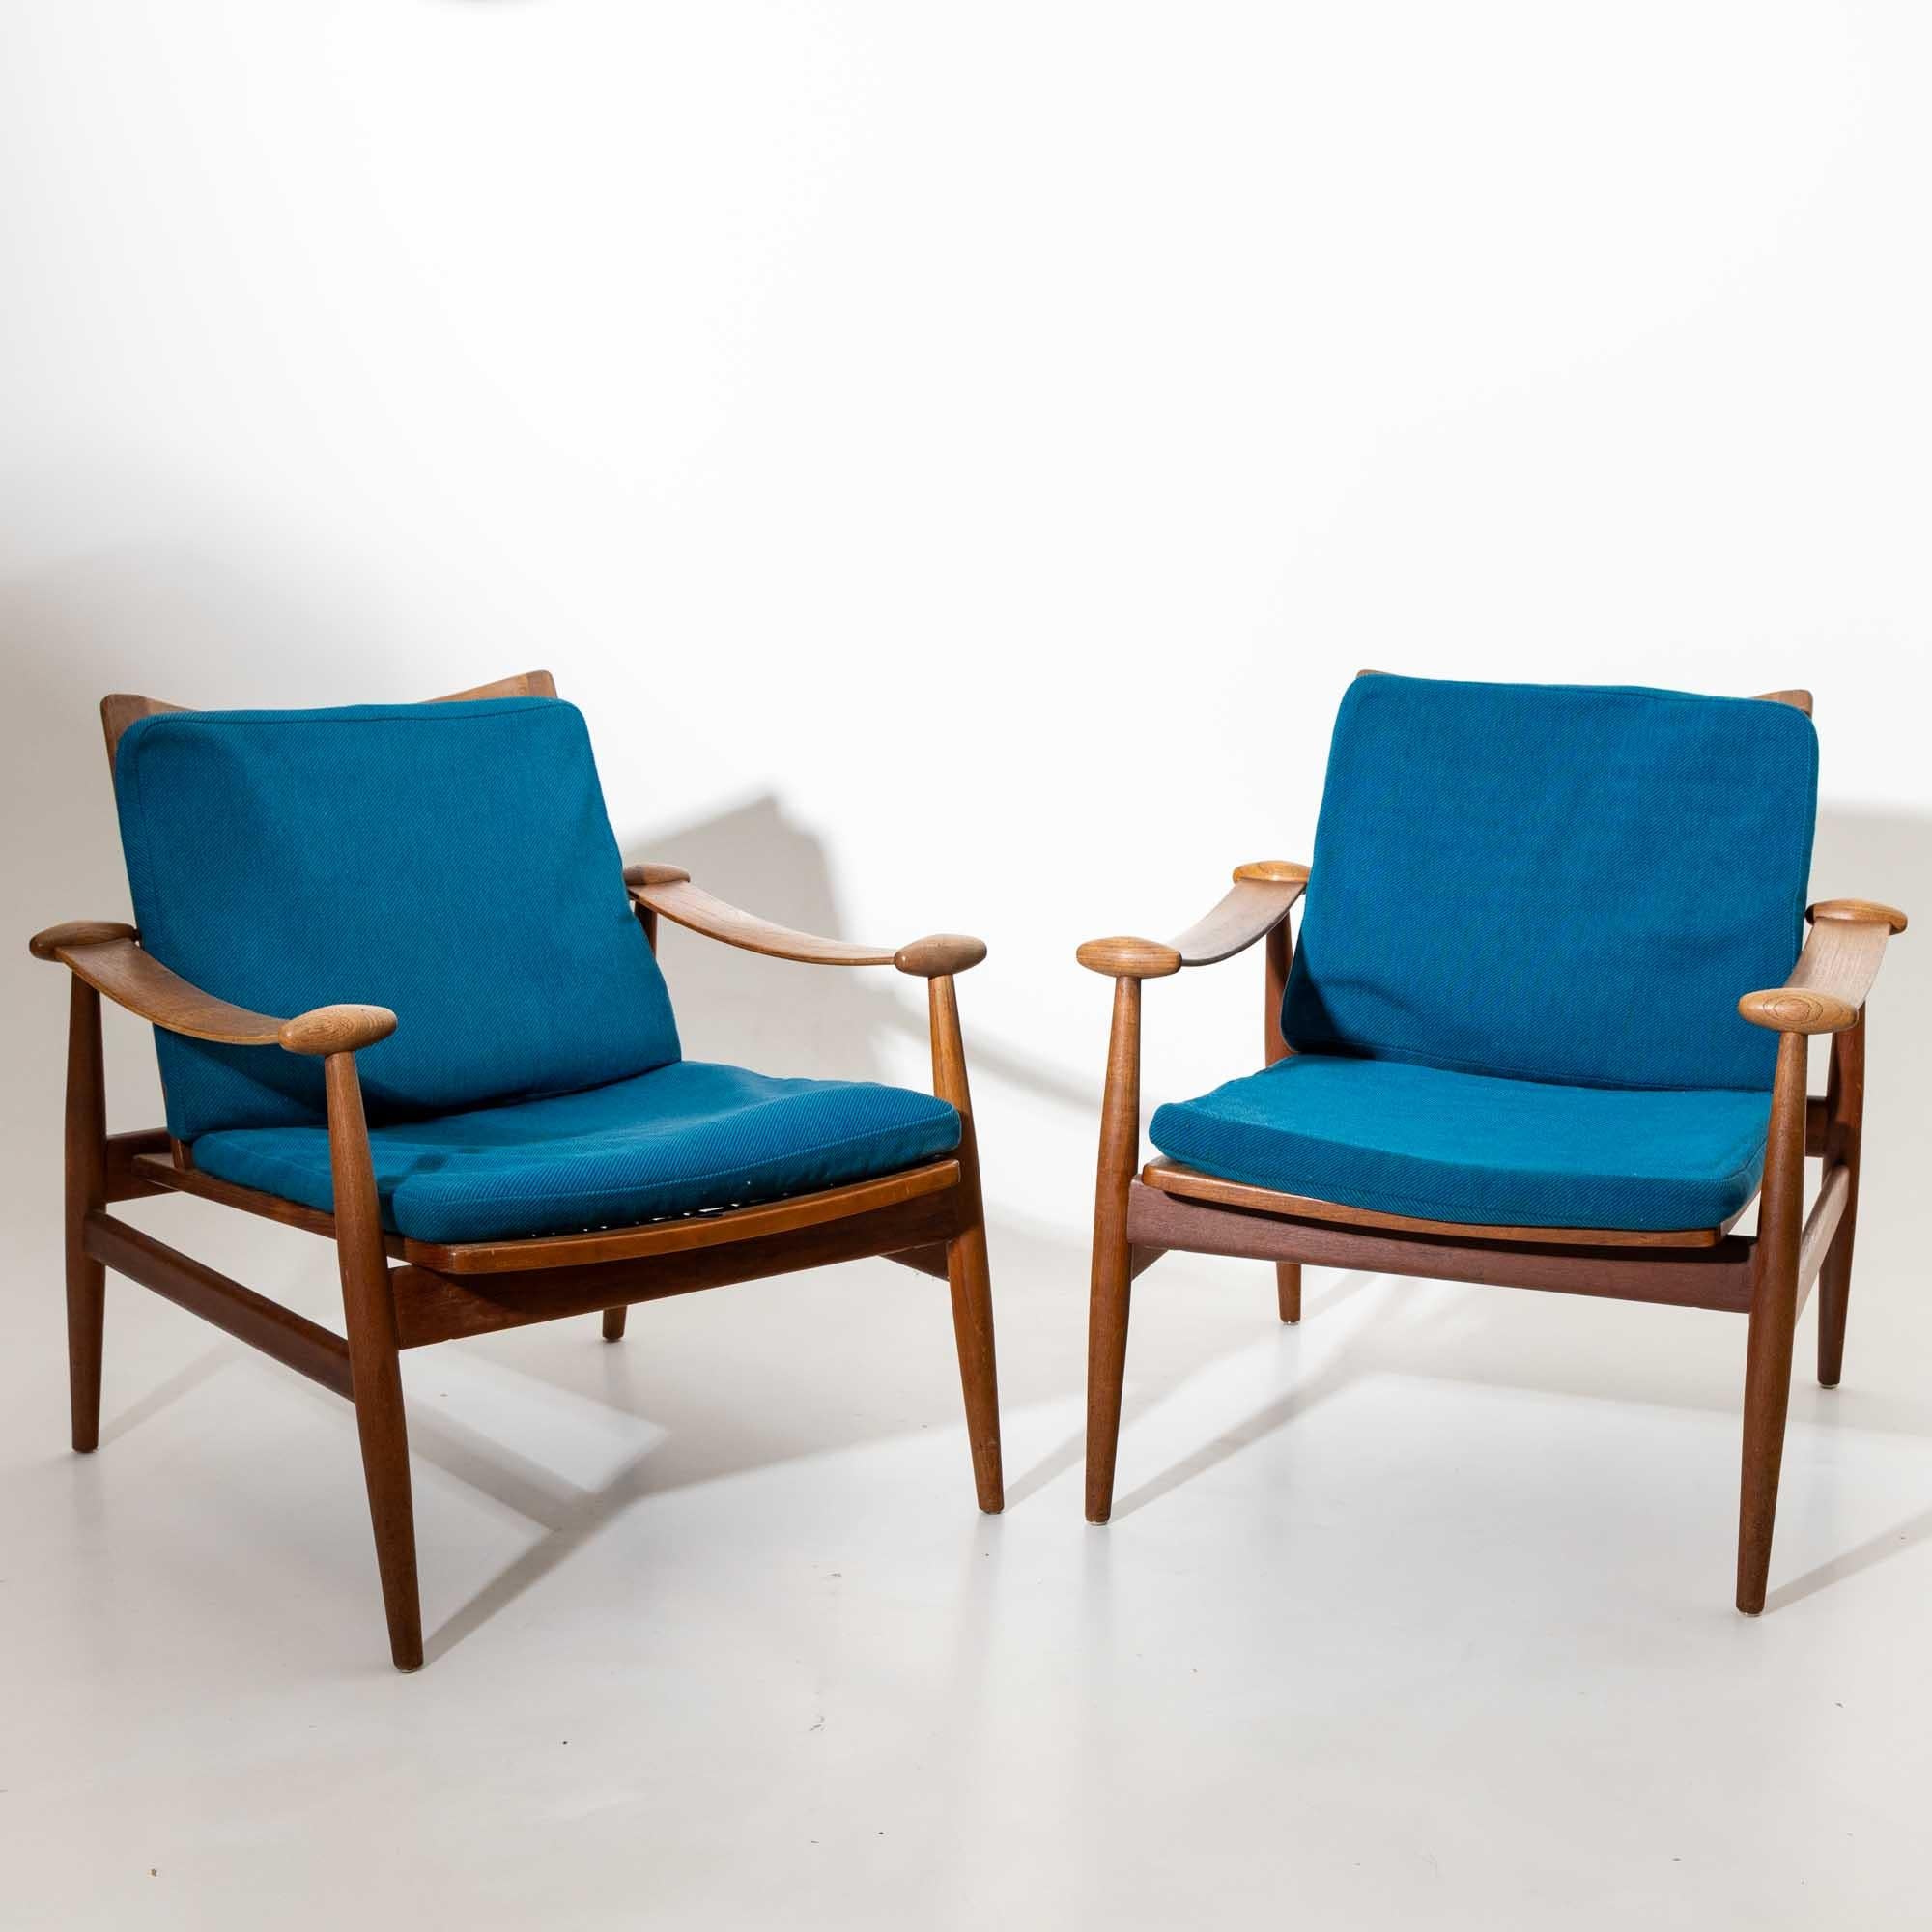 Pair of armchairs of the Spade model, which was designed by Finn Juhl for France & Son in the 1960s. The slightly curved armrests end in the characteristic conical end pieces and give the minimalist frame a special character. The armchairs are in